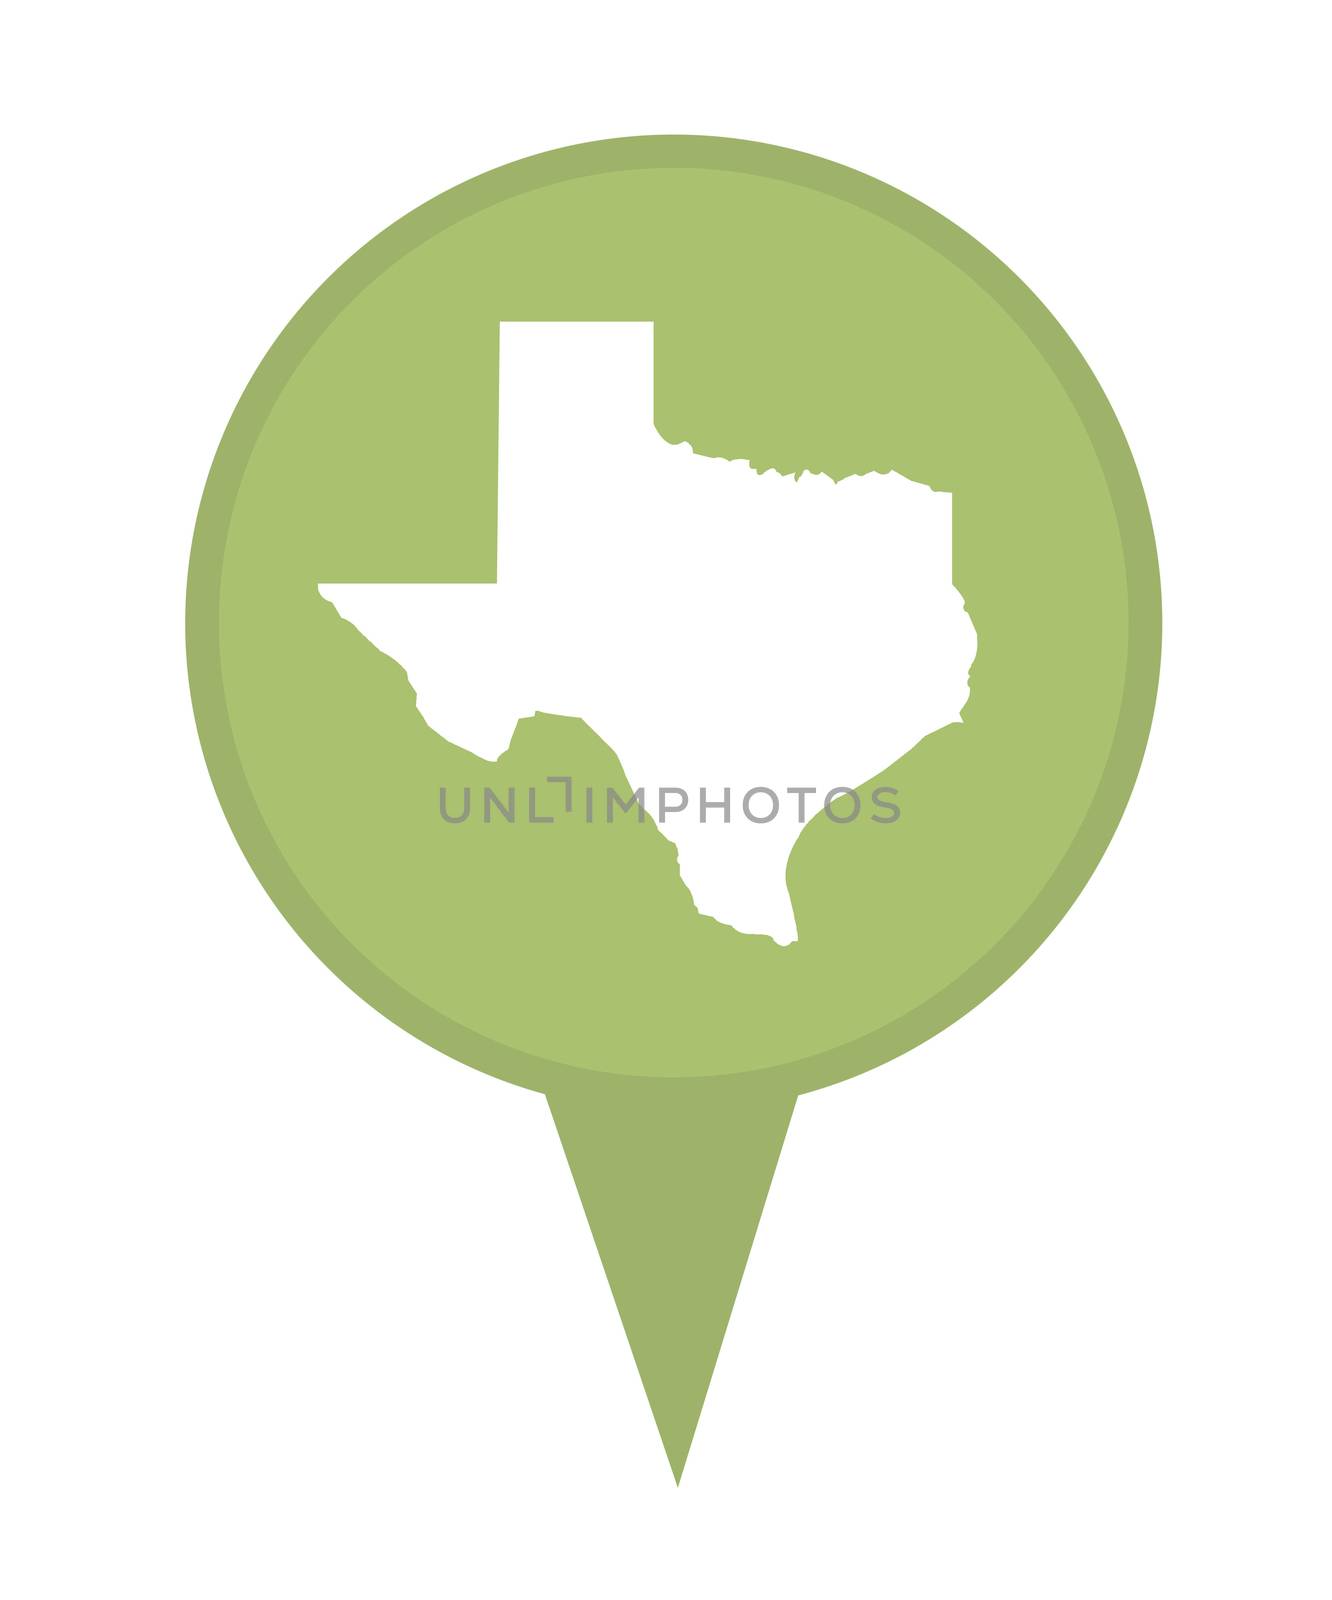 American state of Texas marker pin isolated on a white background.